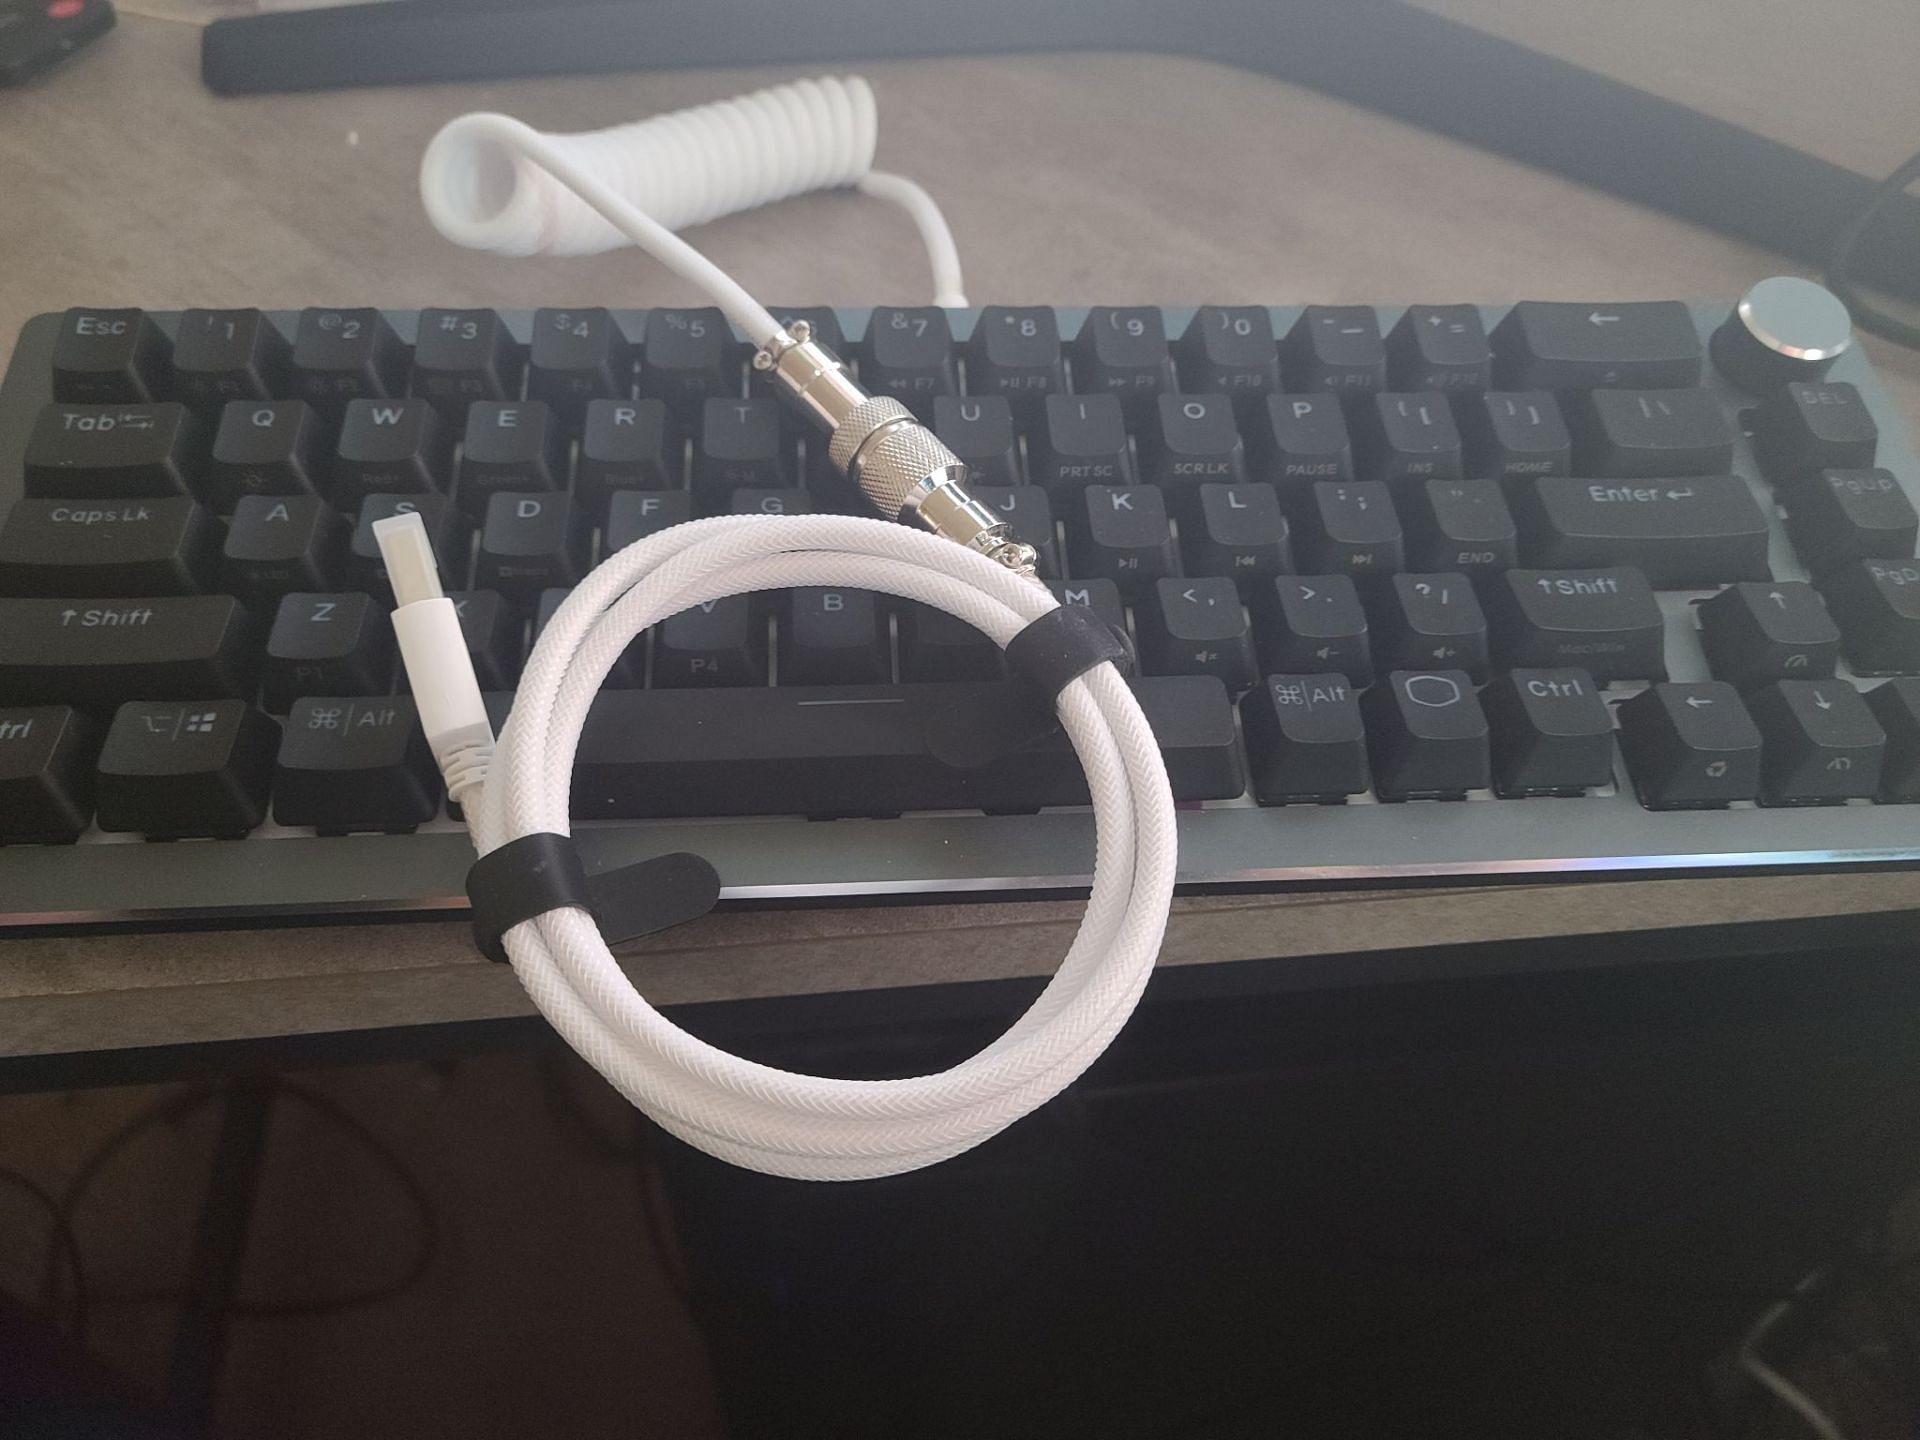 Cooler Master's CK721 with the coiled cable (Image via Cooler Master)